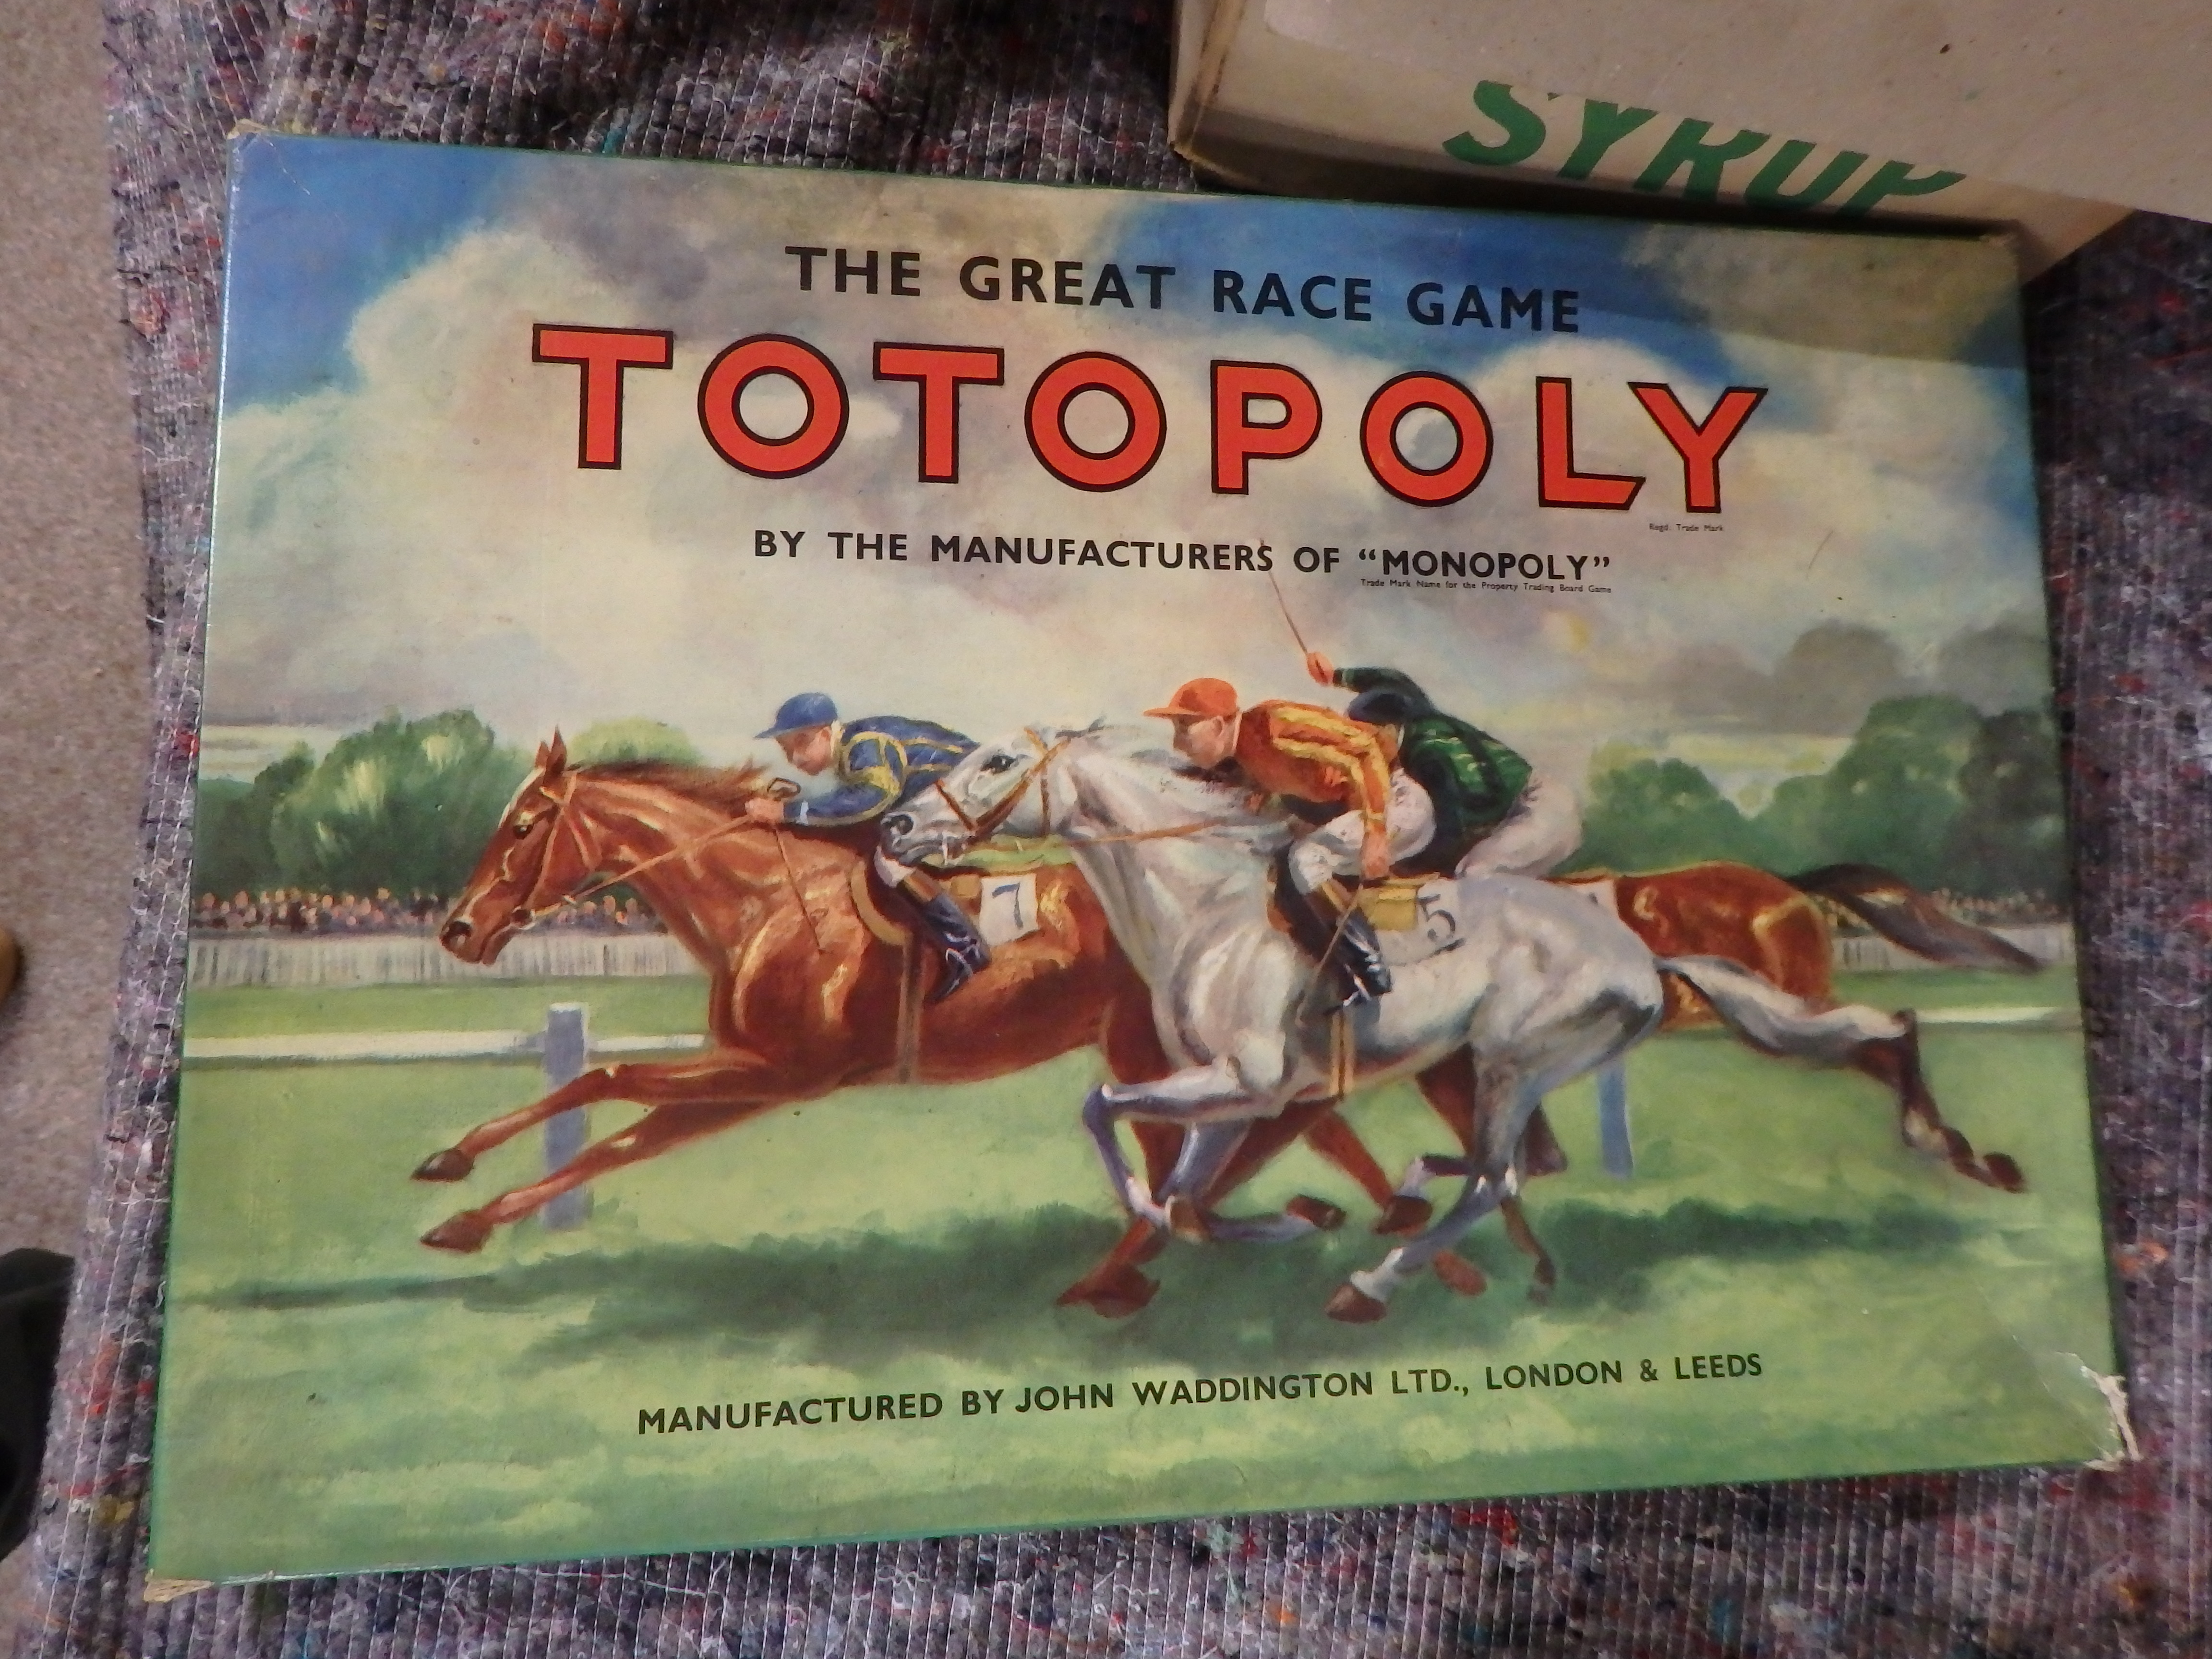 Totopoly